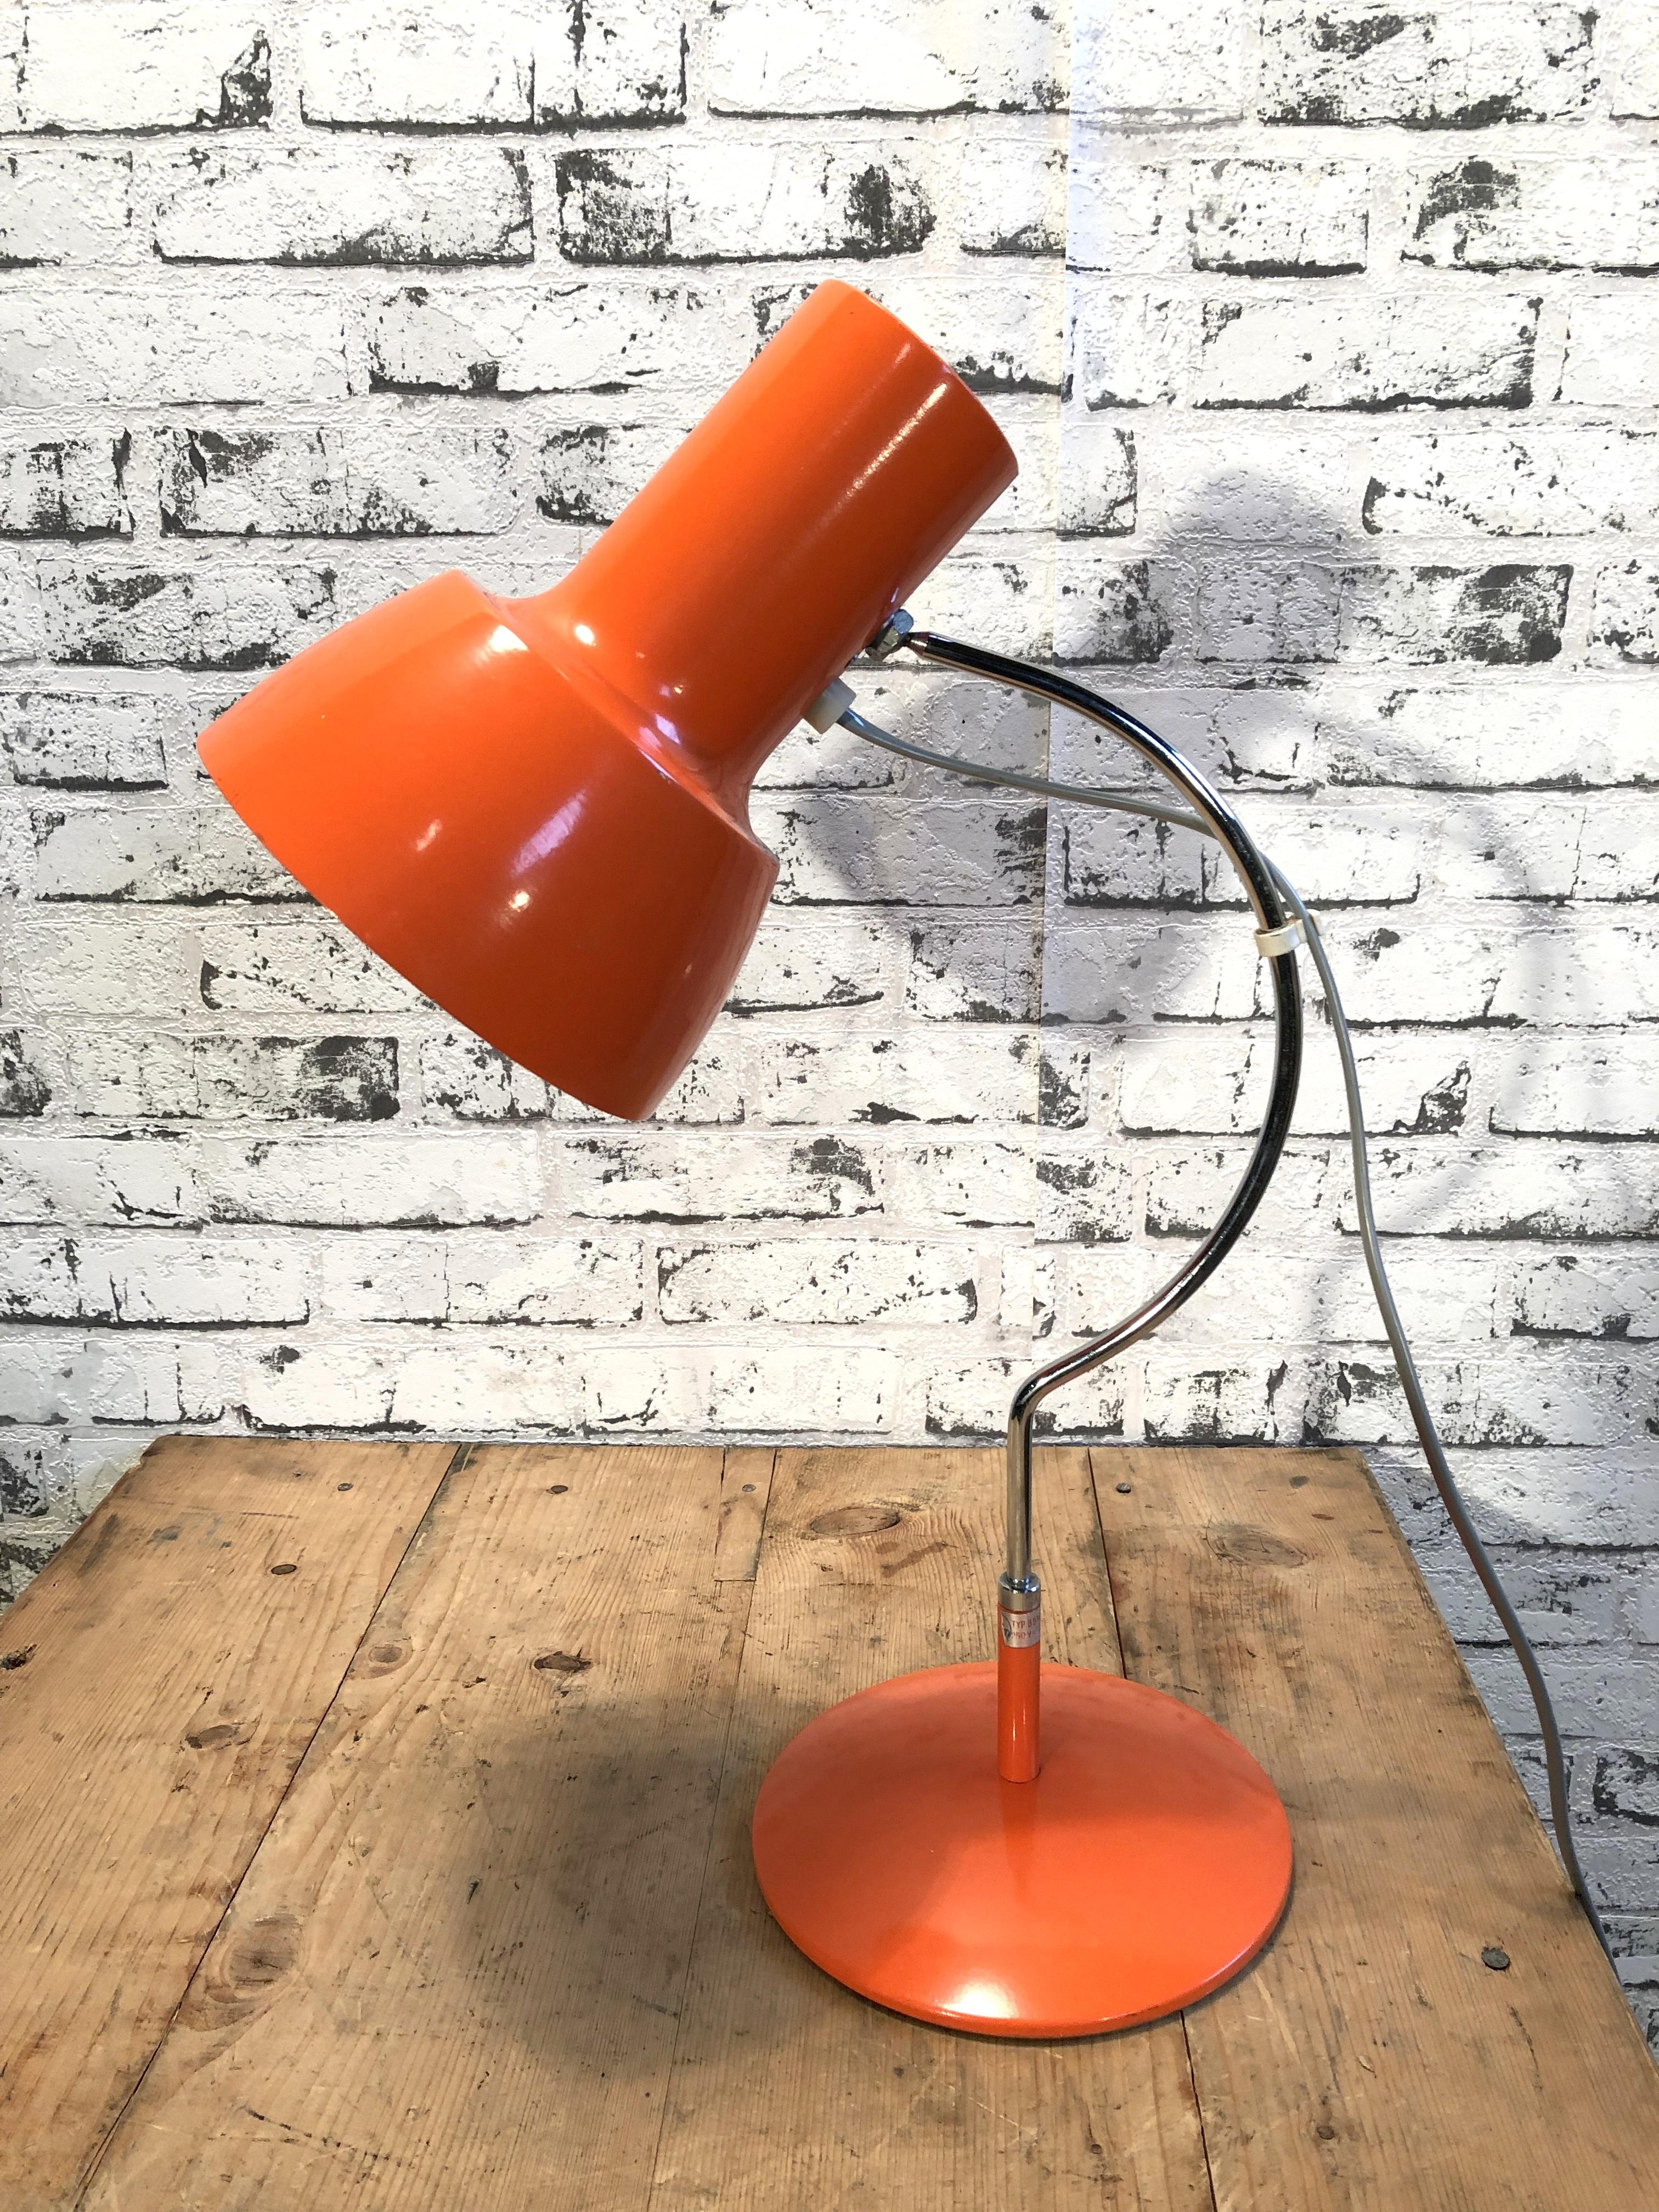 This table lamp, Napako model 1633, was designed by Josef Hurka and produced in former Czechoslovakia by Napako during the 1960s. The lamp has a steel body and an aluminium lampshade. Switch is situated directly on shade. Good vintage condition.